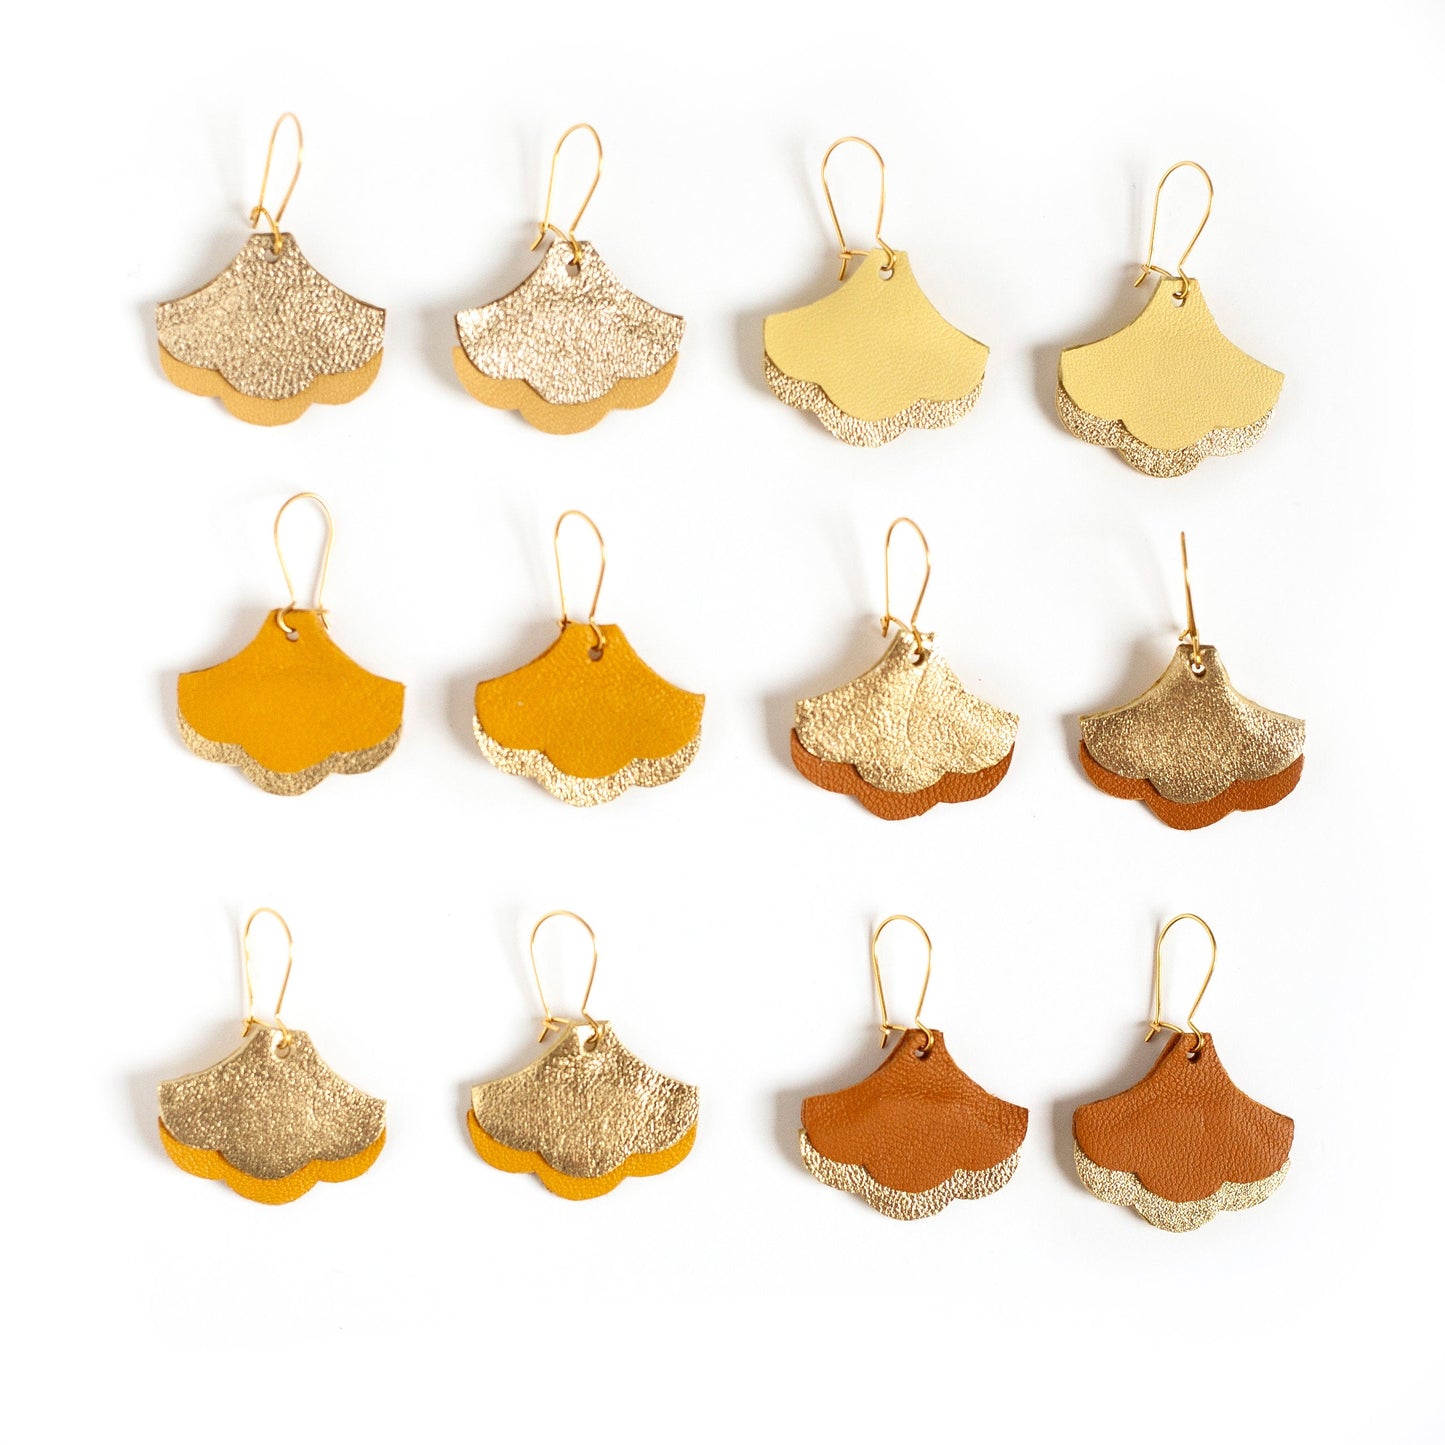 Ginkgo Biloba earrings in caramel brown and gold leather